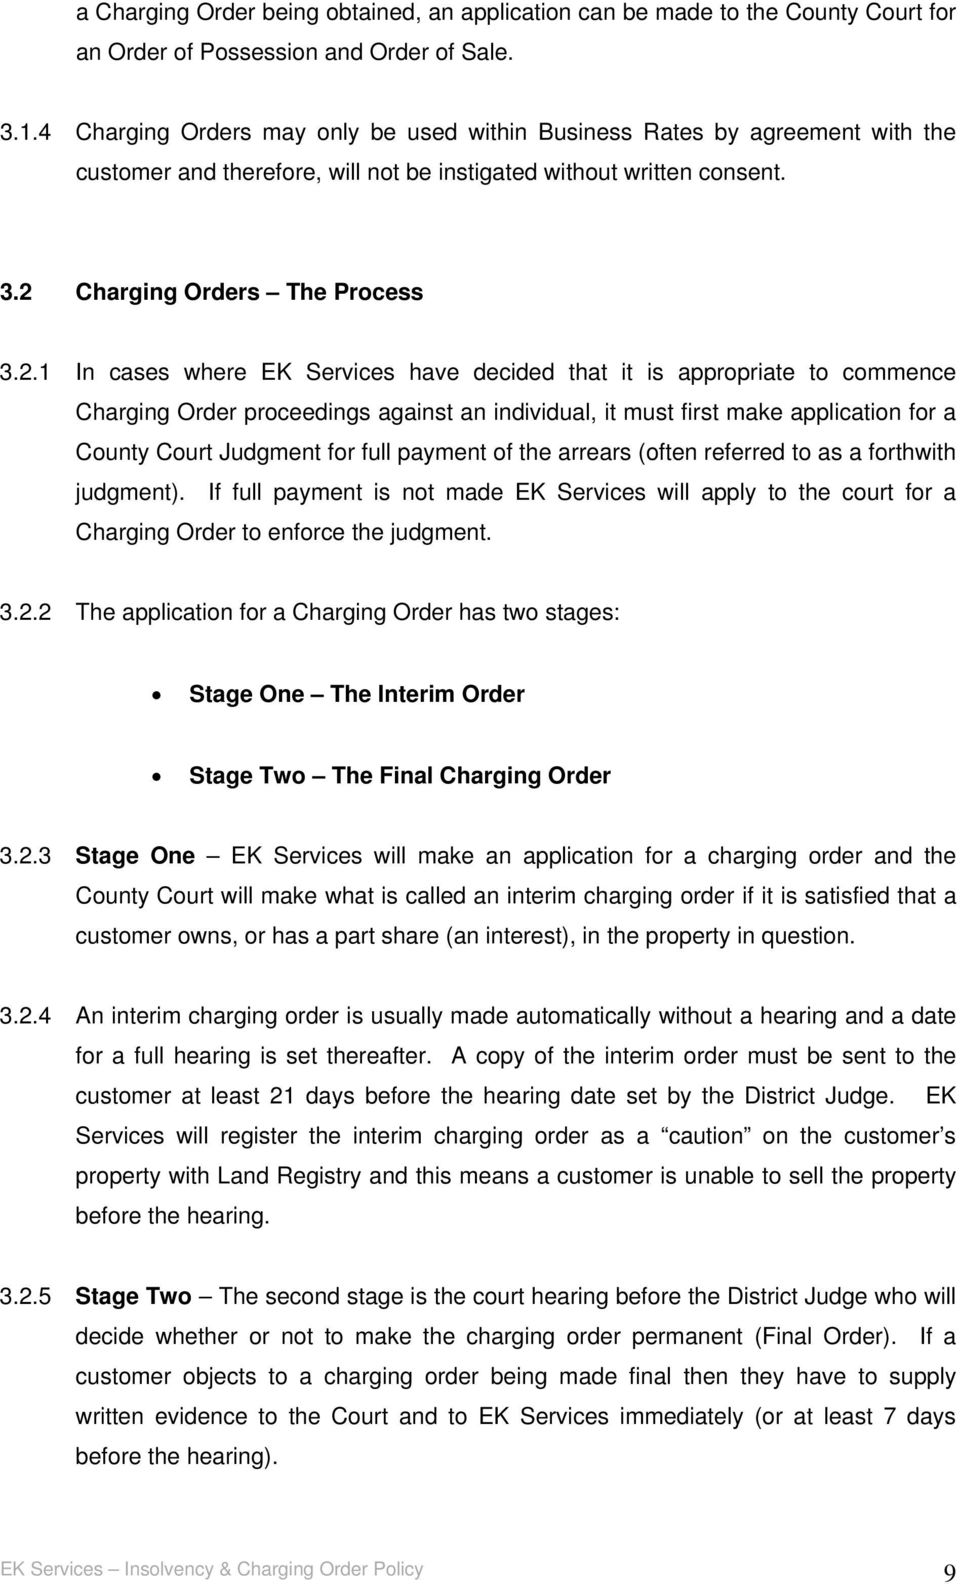 Charging Orders The Process 3.2.